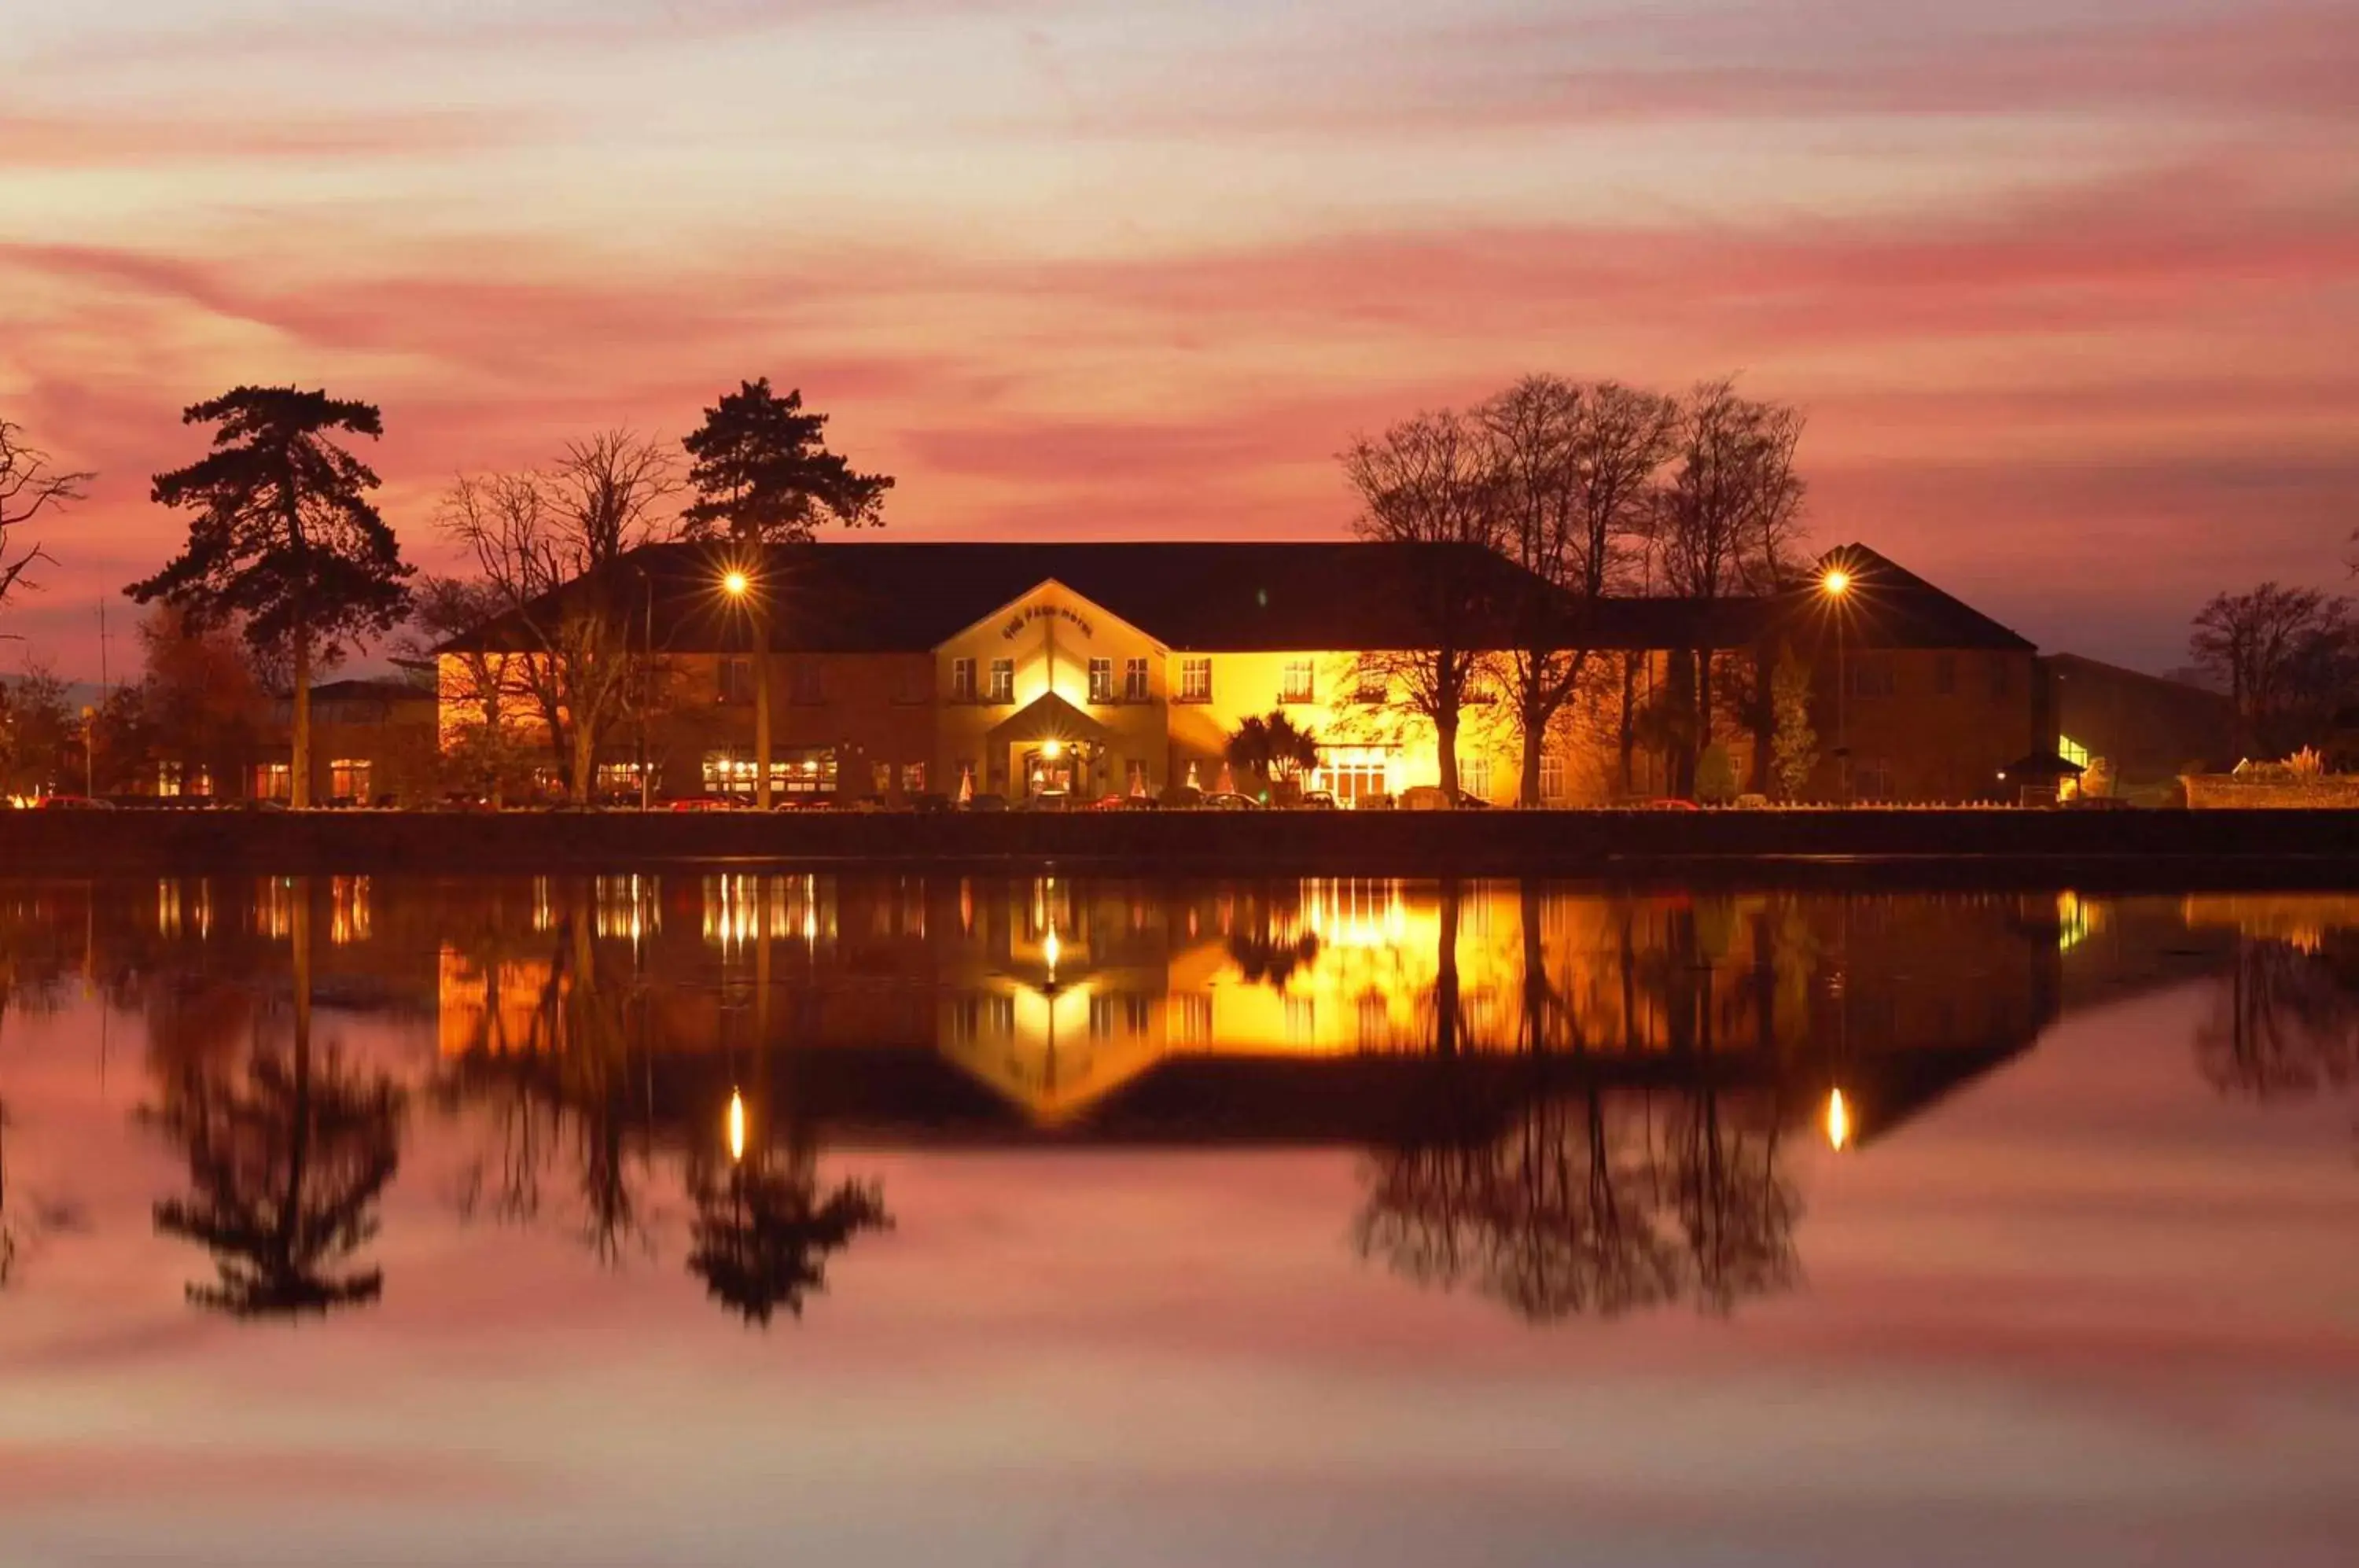 Property building, Sunrise/Sunset in The Park Hotel Dungarvan